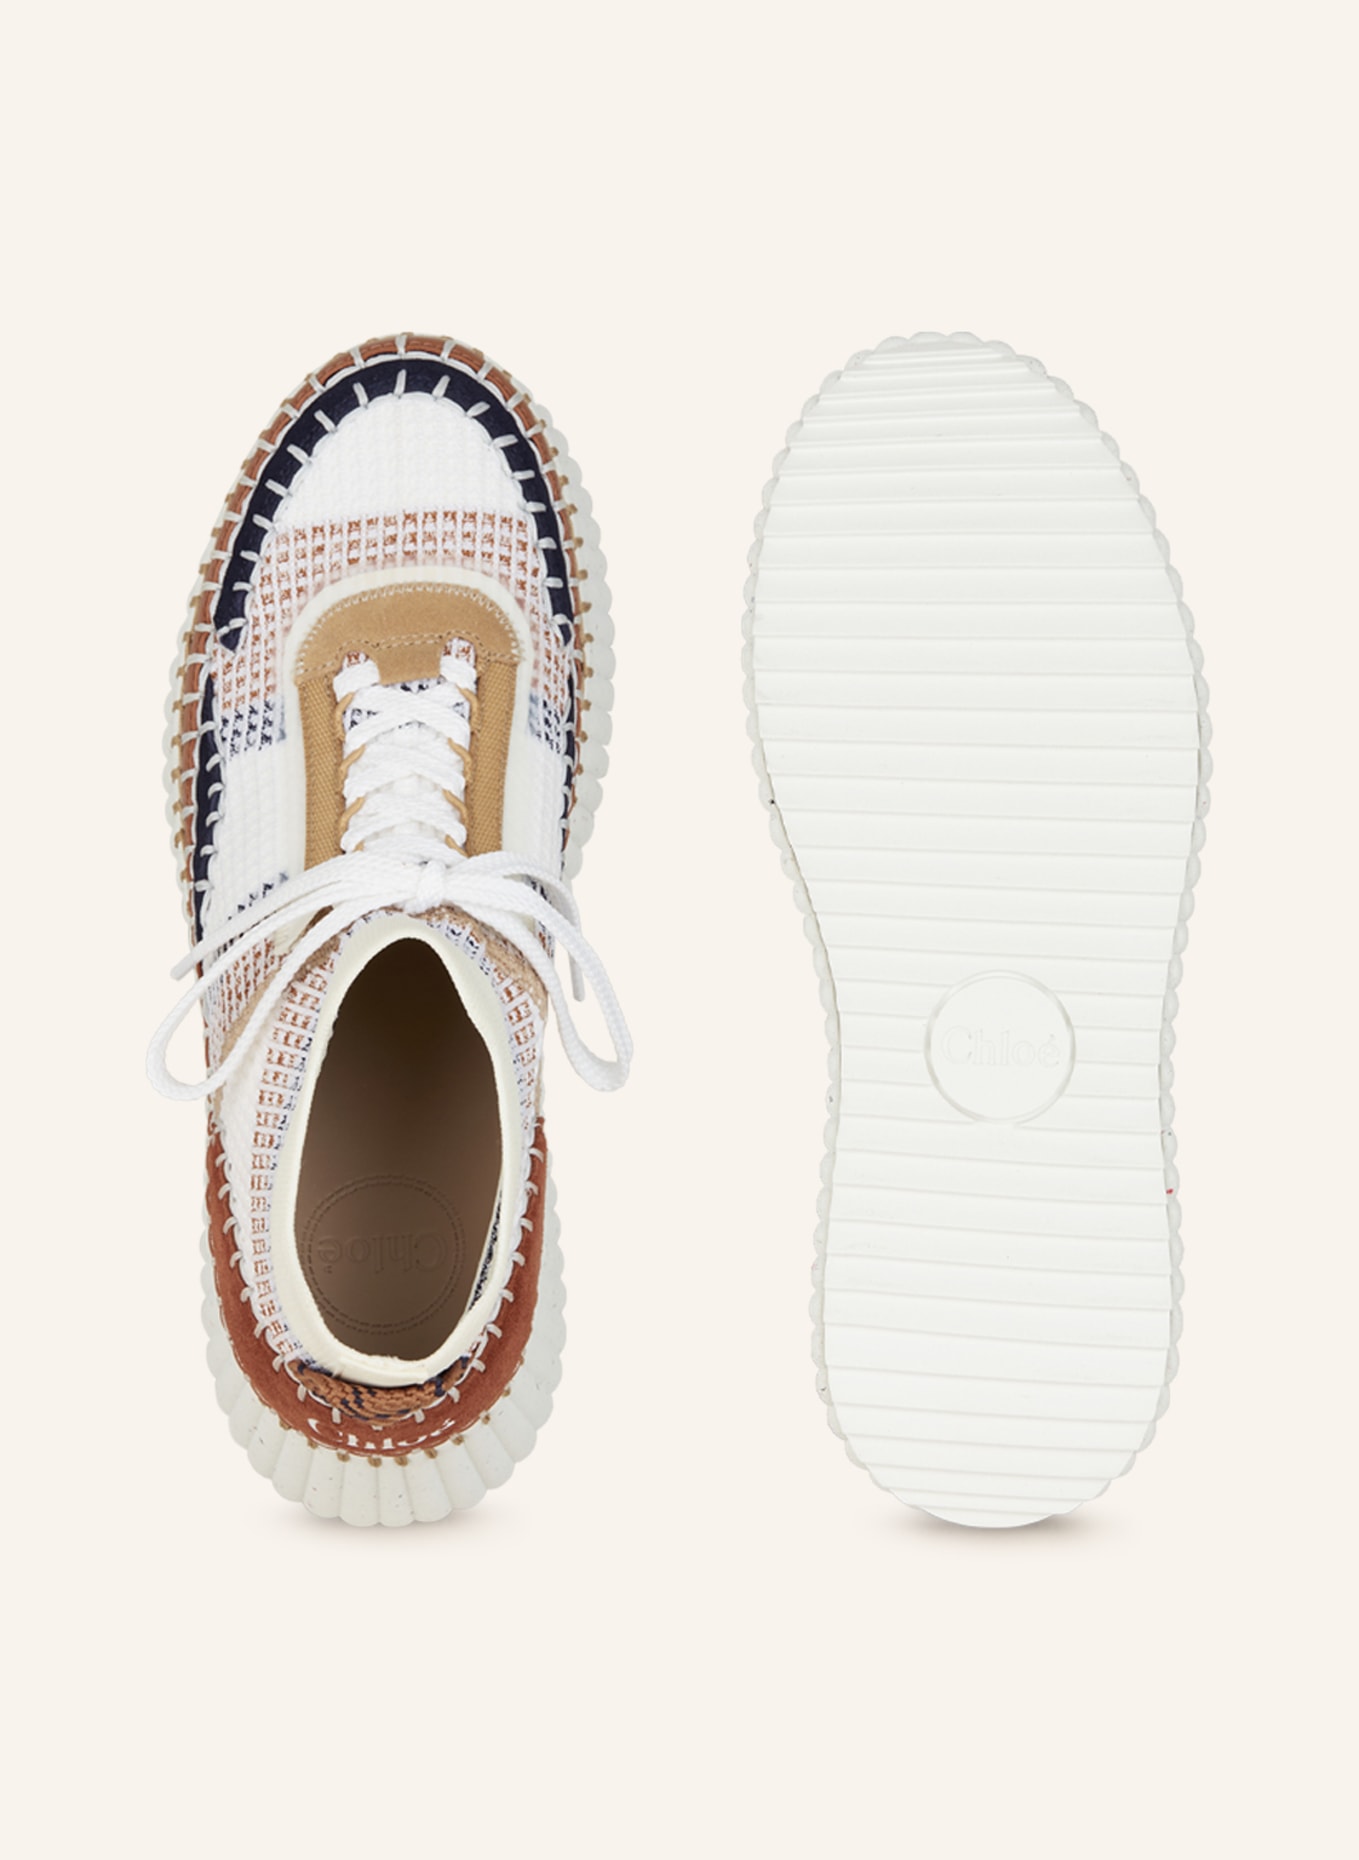 Chloé Hightop sneakers NAMA, Color: BROWN/ WHITE/ BLUE (Image 5)